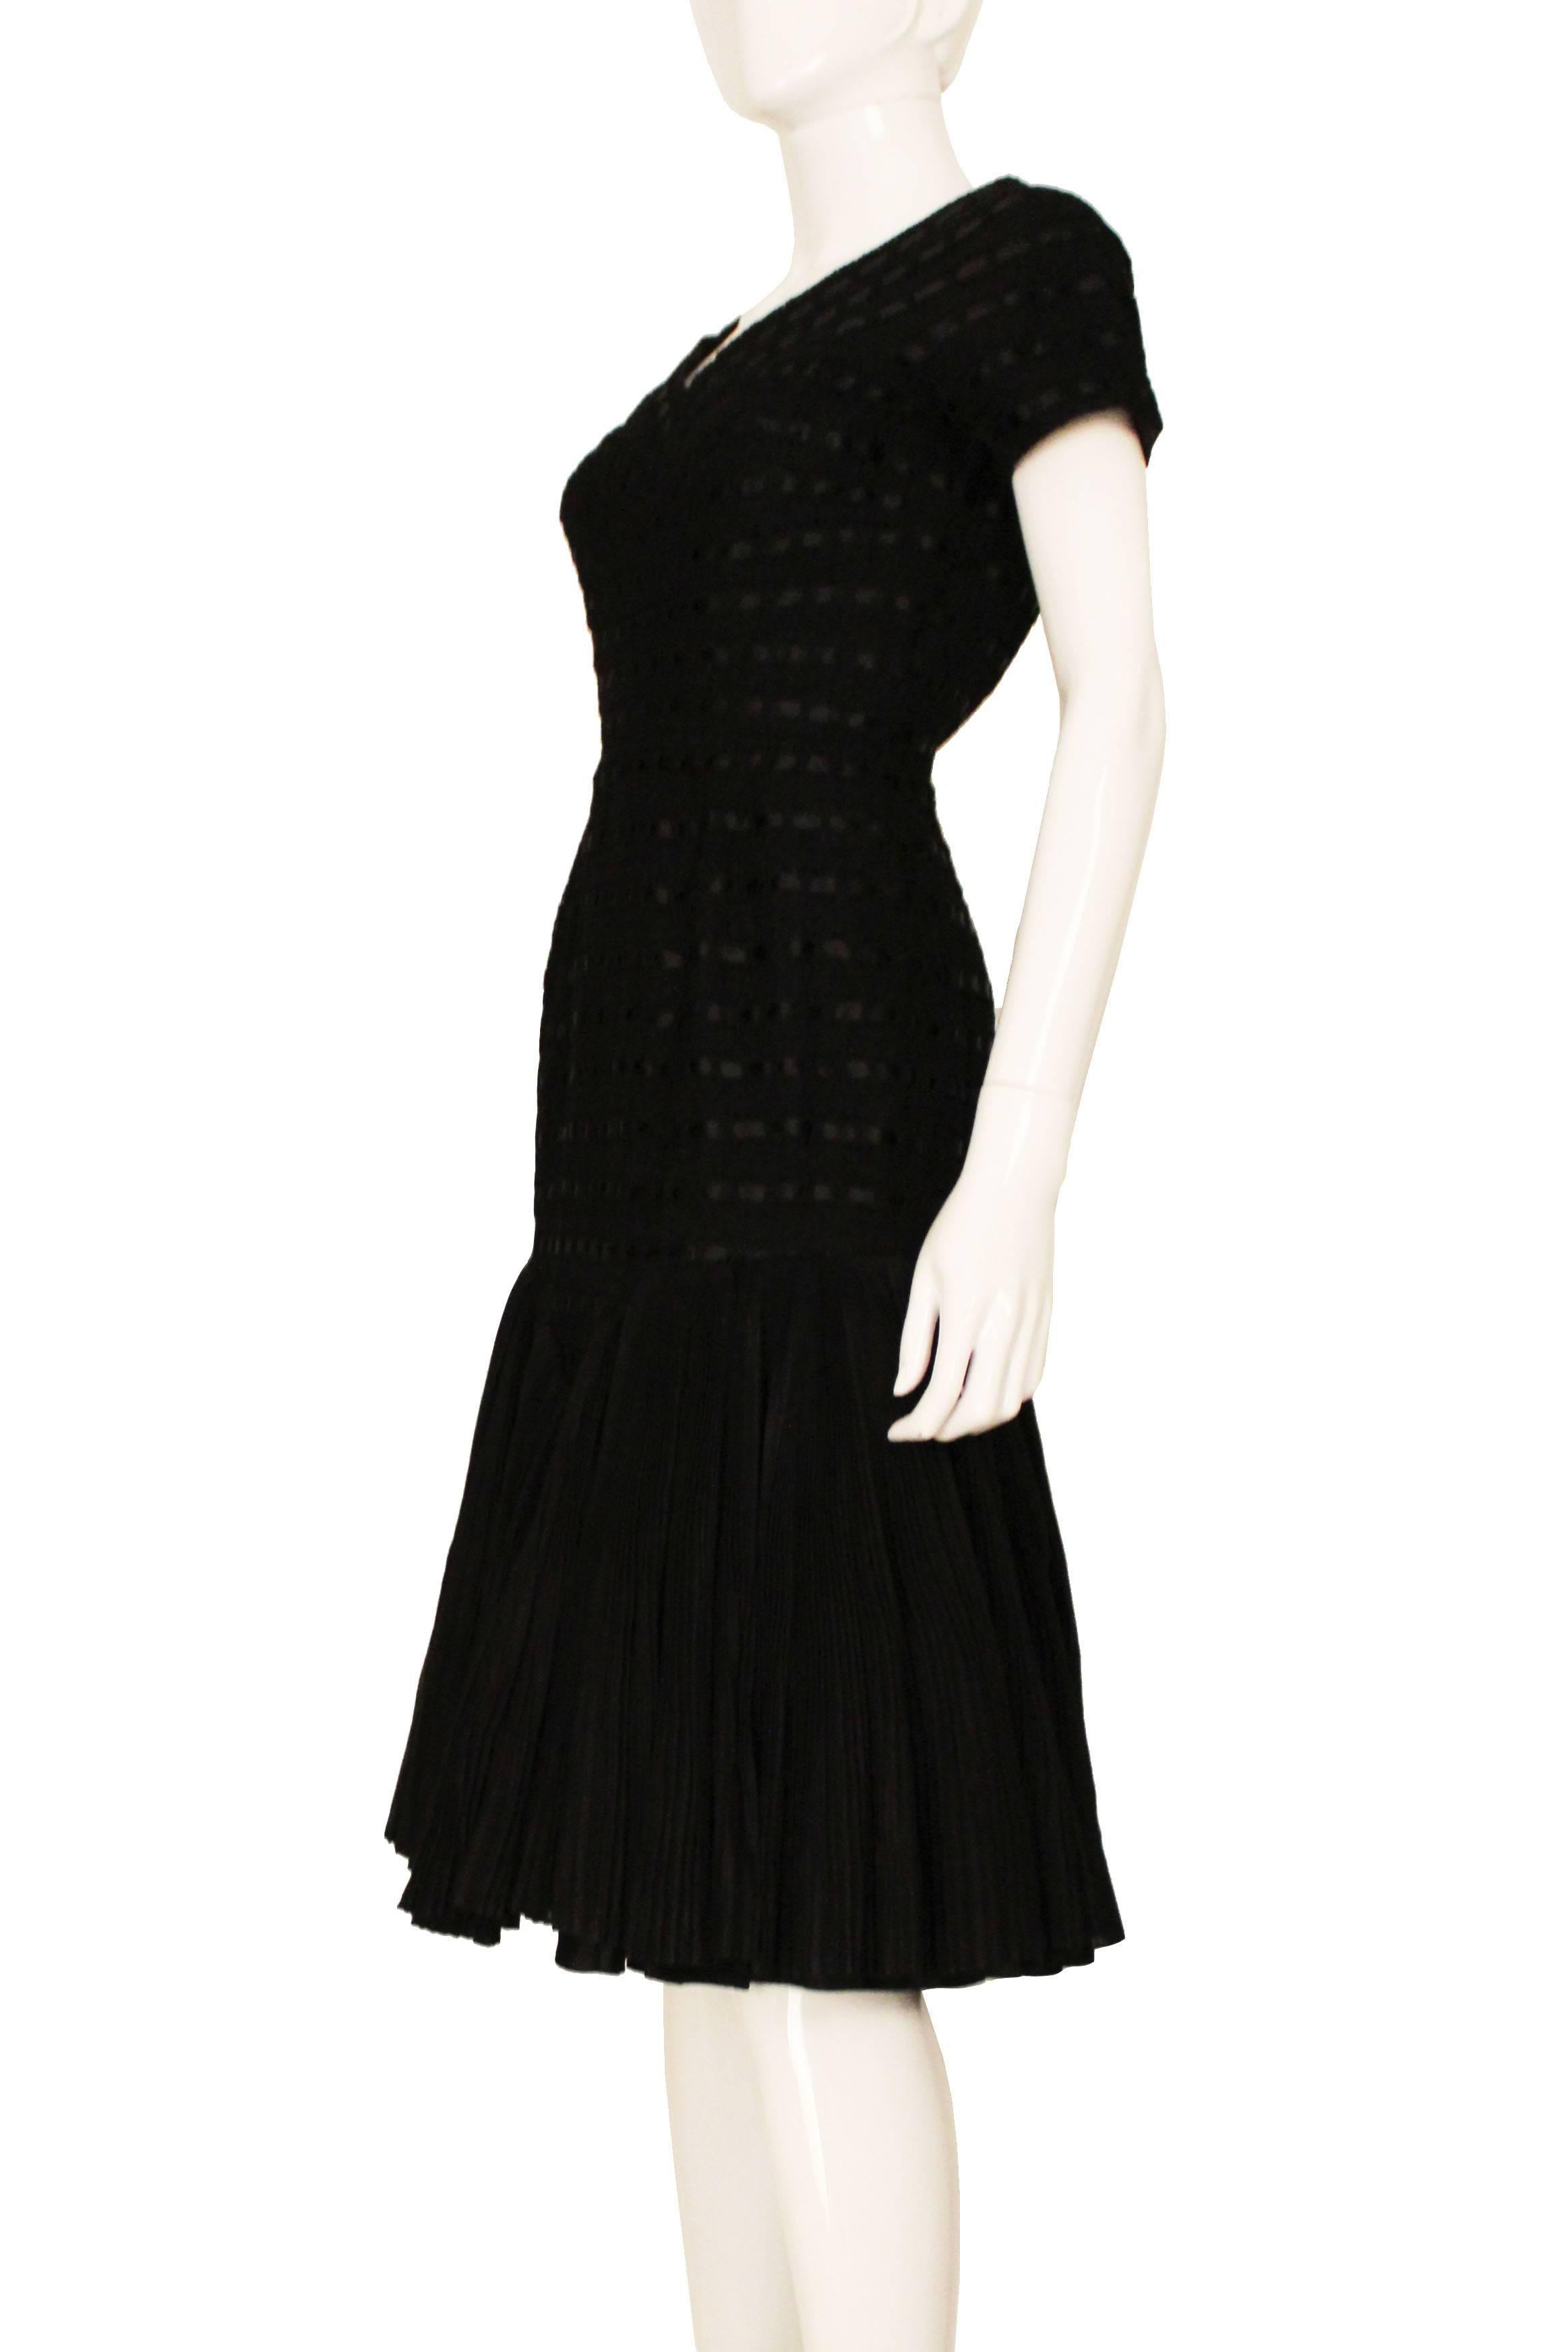 This is a truly stunning 1950s LBD by Irish couturier Sybil Connolly. The main body of the dress is made of a crochet that's then woven with black ribbon. There is so much detail in the fabrics that make it a truly amazing dress. It has a beautiful